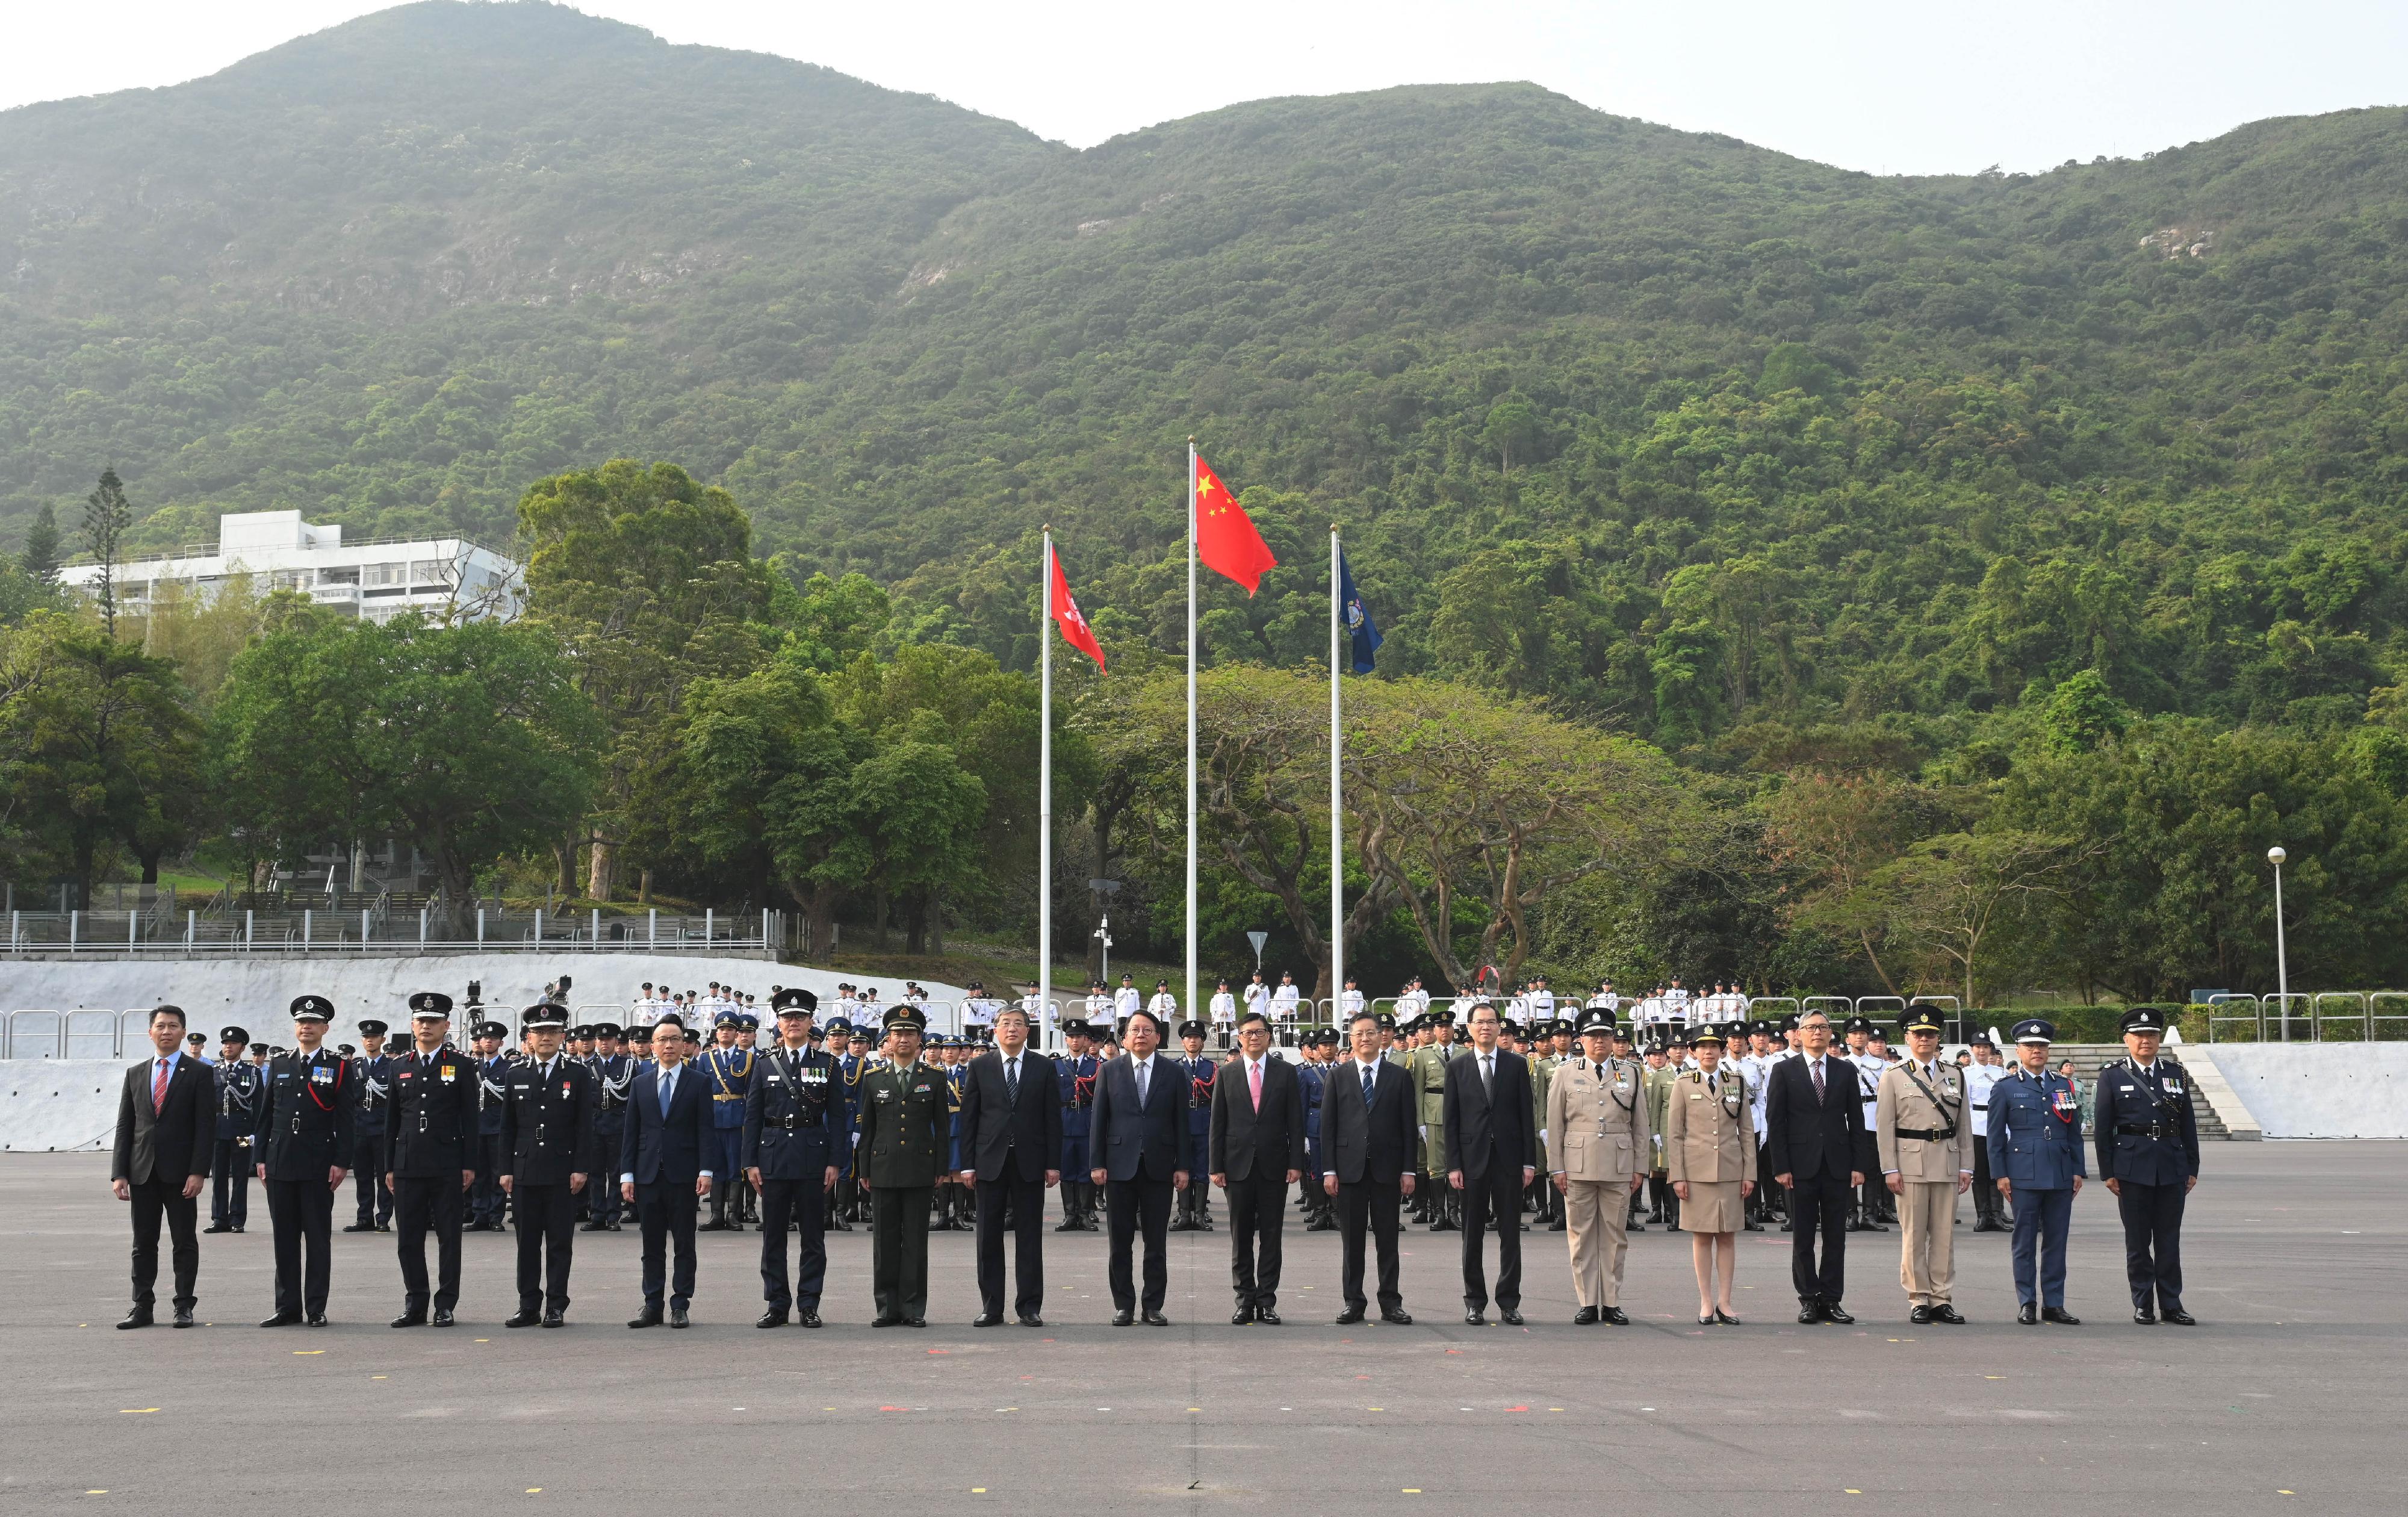 The Chief Secretary for Administration, Mr Chan Kwok-ki, attended the National Security Education Day flag raising ceremony today (April 15). Photo shows (from seventh left) the Deputy Chief of Staff of the Chinese People's Liberation Army Hong Kong Garrison, Mr Zhang Jun; Deputy Director of the Liaison Office of the Central People's Government in the Hong Kong Special Administrative Region (HKSAR) Mr Luo Yonggang; Mr Chan; the Secretary for Security, Mr Tang Ping-keung; Deputy Head of the Office for Safeguarding National Security of the Central People's Government in the HKSAR Mr Li Jiangzhou; the Secretary General of the Committee for Safeguarding National Security of the HKSAR, Mr Sonny Au; and heads of disciplined services departments and other officiating guests at the parade.